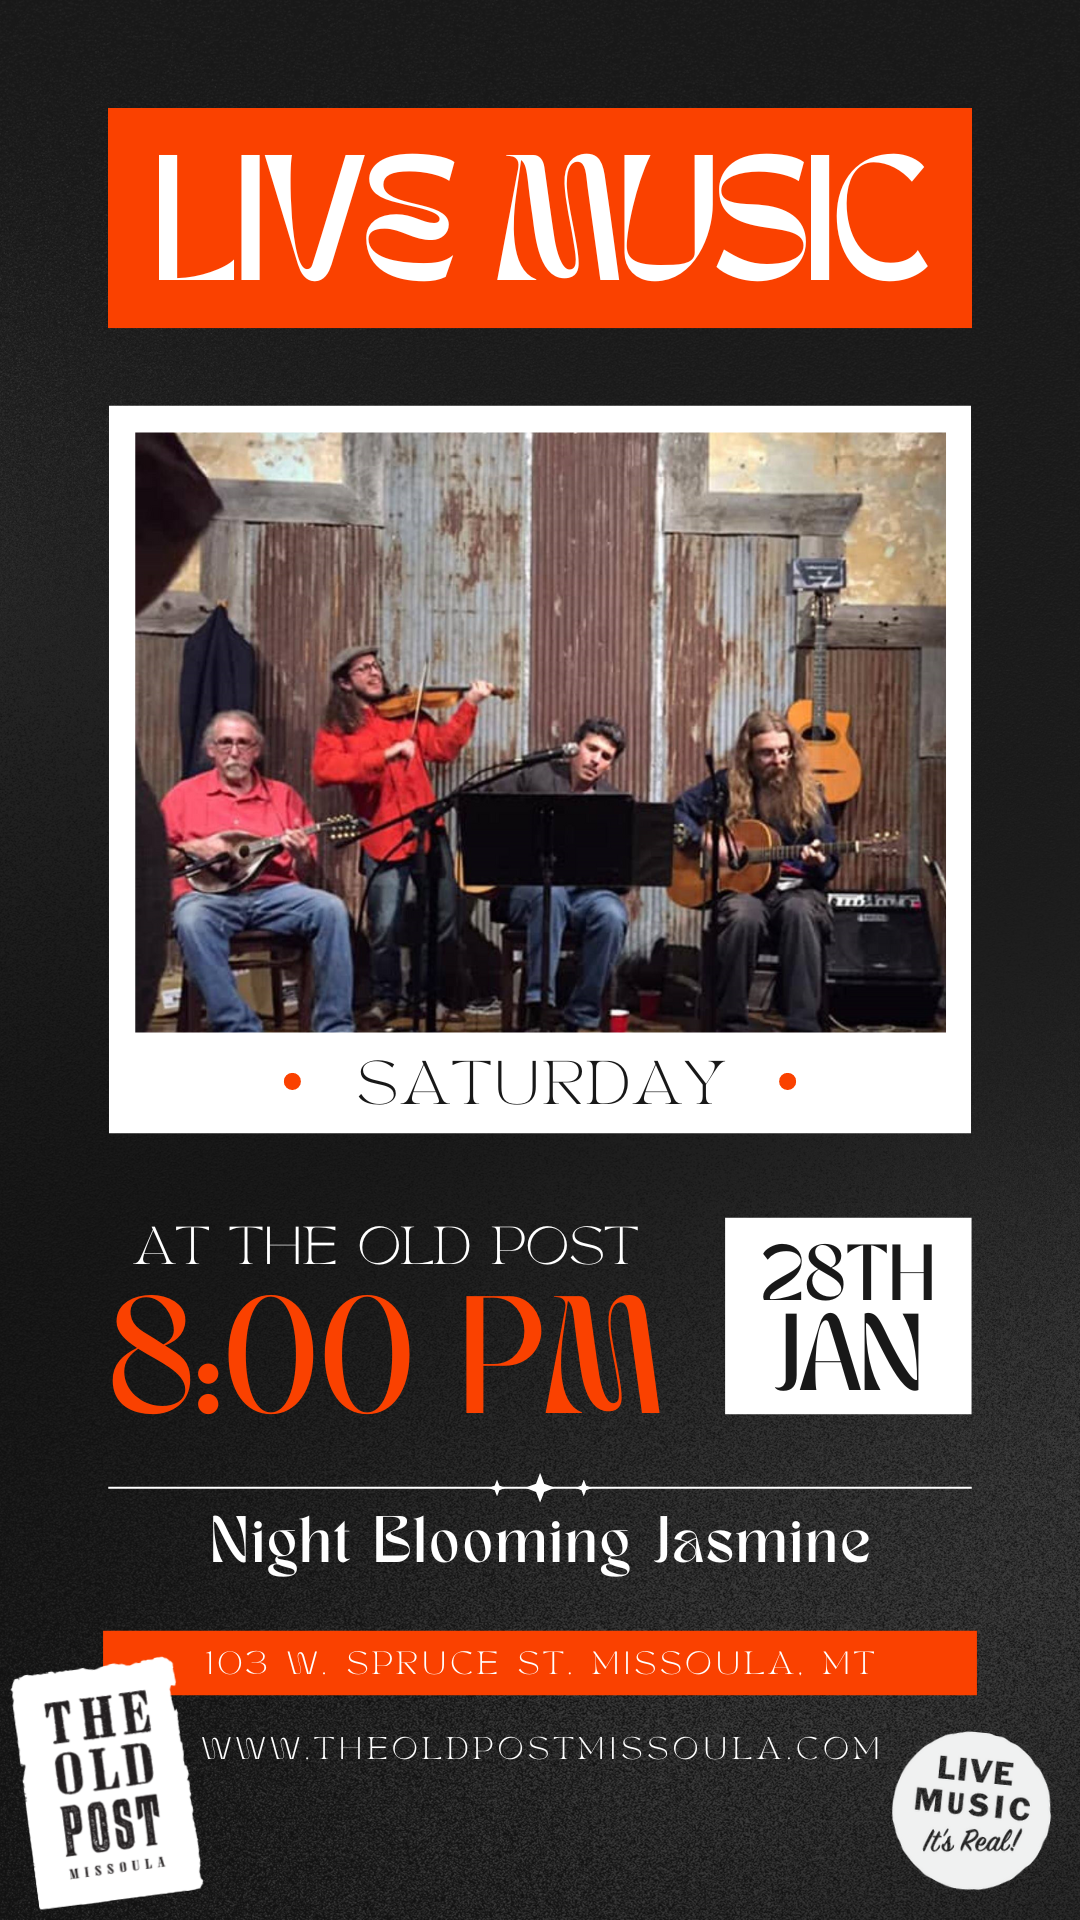 Jazz with Night Blooming Jasmine from 8:00 pm to 10:00 pm Saturday, January 28 at The Old Post in Downtown Missoula